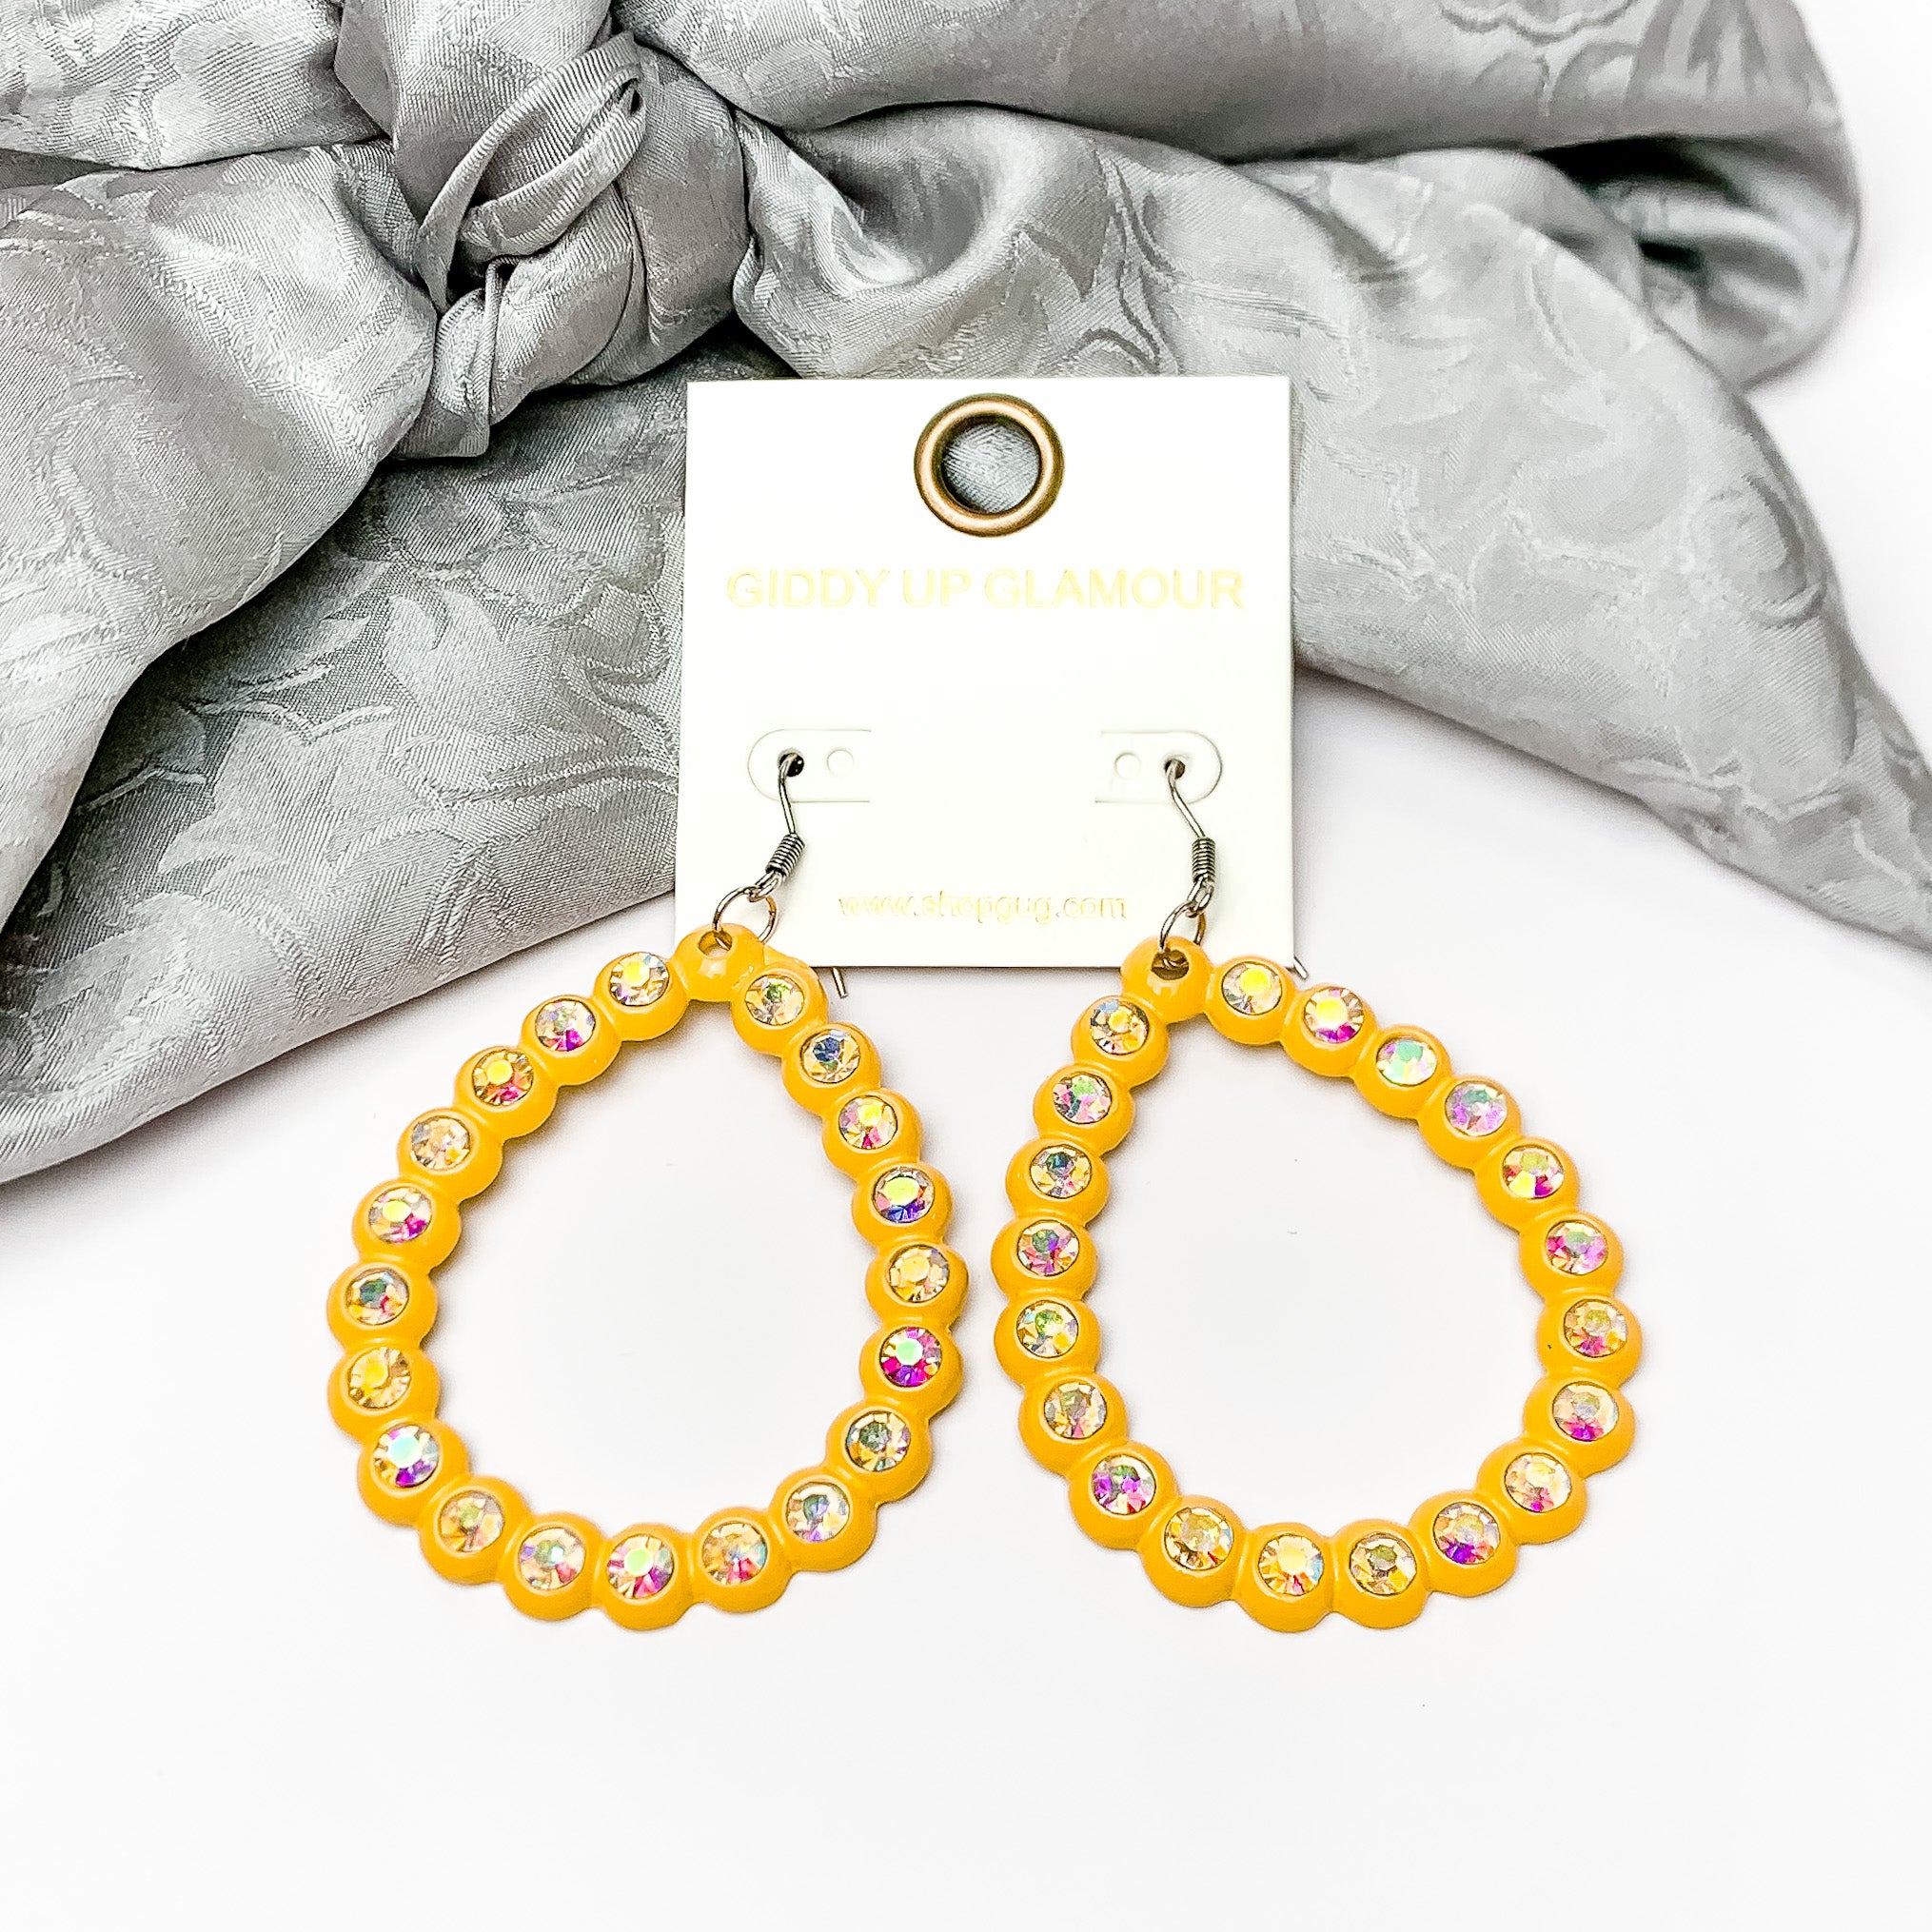 Open Teardrop Earrings with AB Crystal Outline in Yellow. Pictured on a white background with silver fabric at the top.